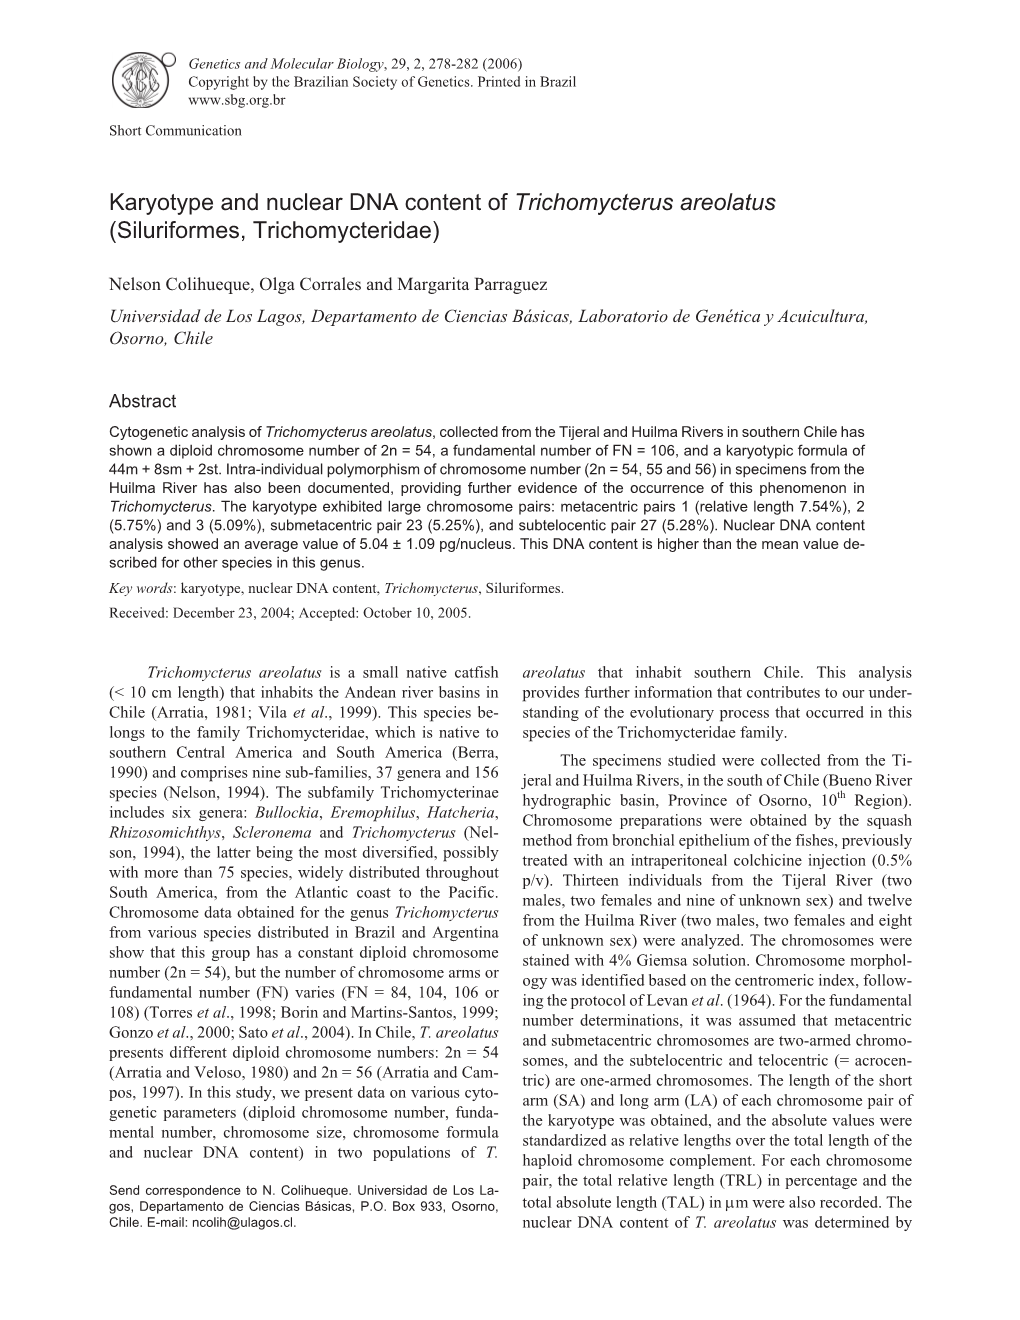 Karyotype and Nuclear DNA Content of Trichomycterus Areolatus (Siluriformes, Trichomycteridae)